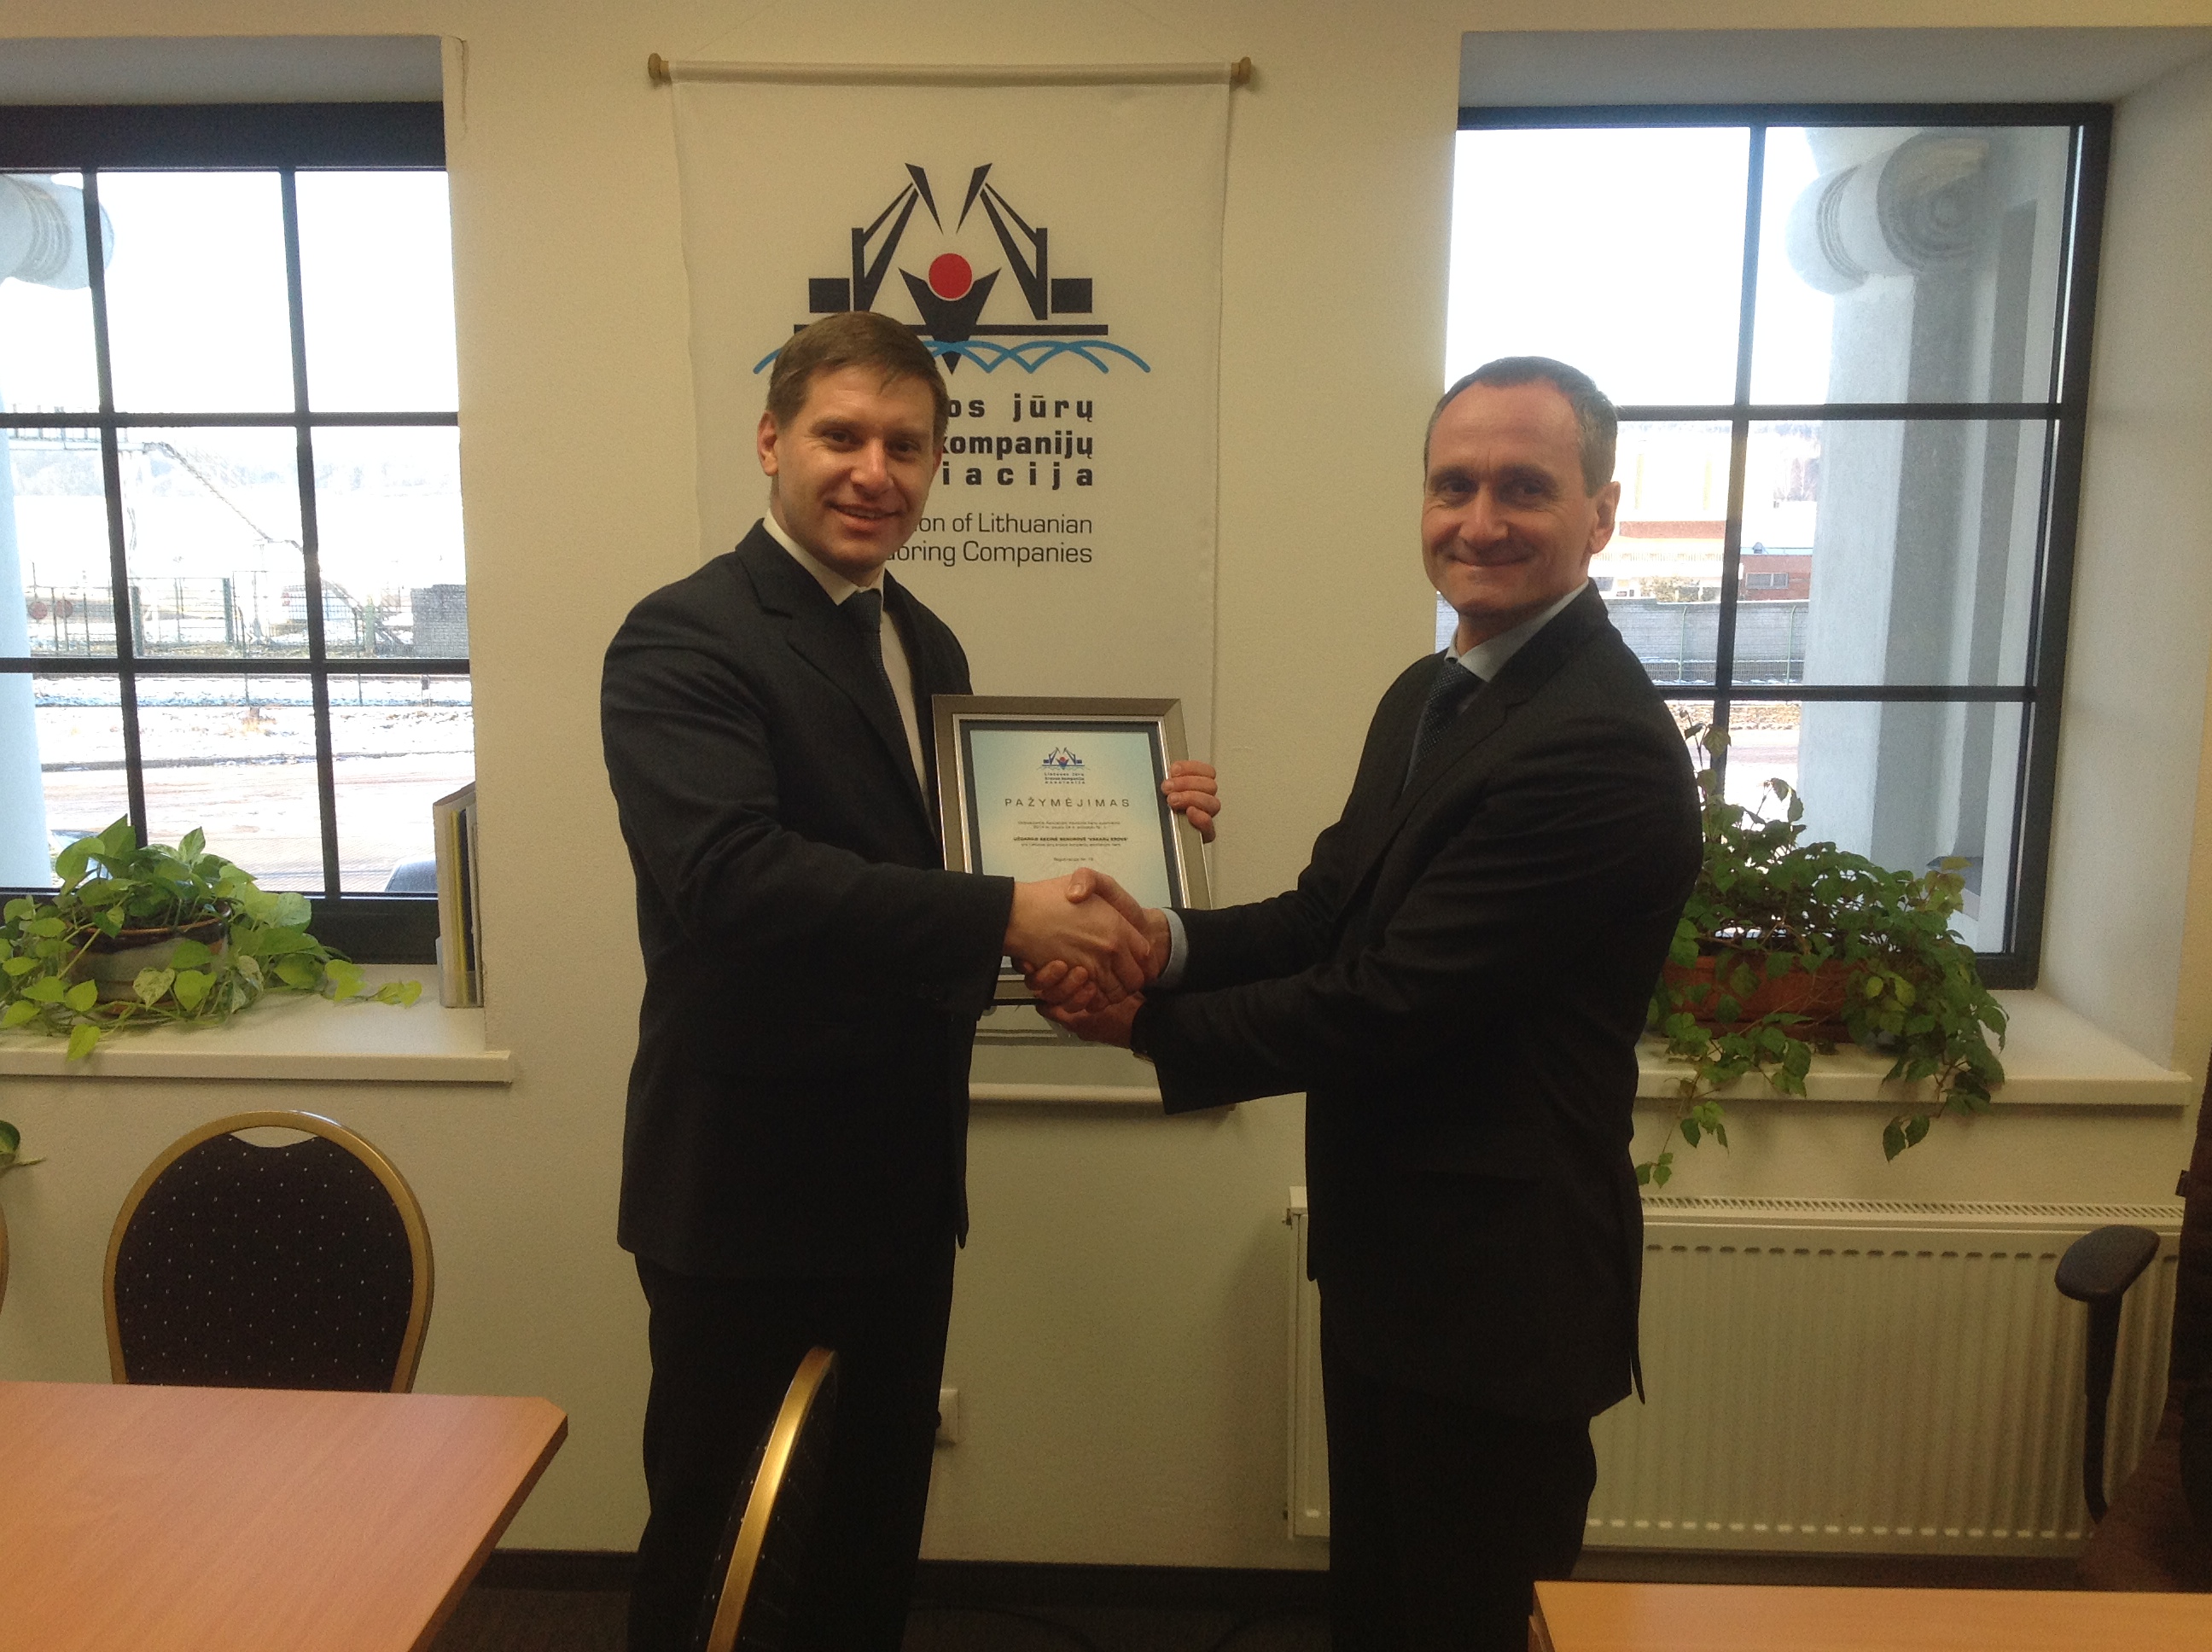 Already the fifteenth stevedoring company has become the member of Association of Lithuanian Stevedoring Companies